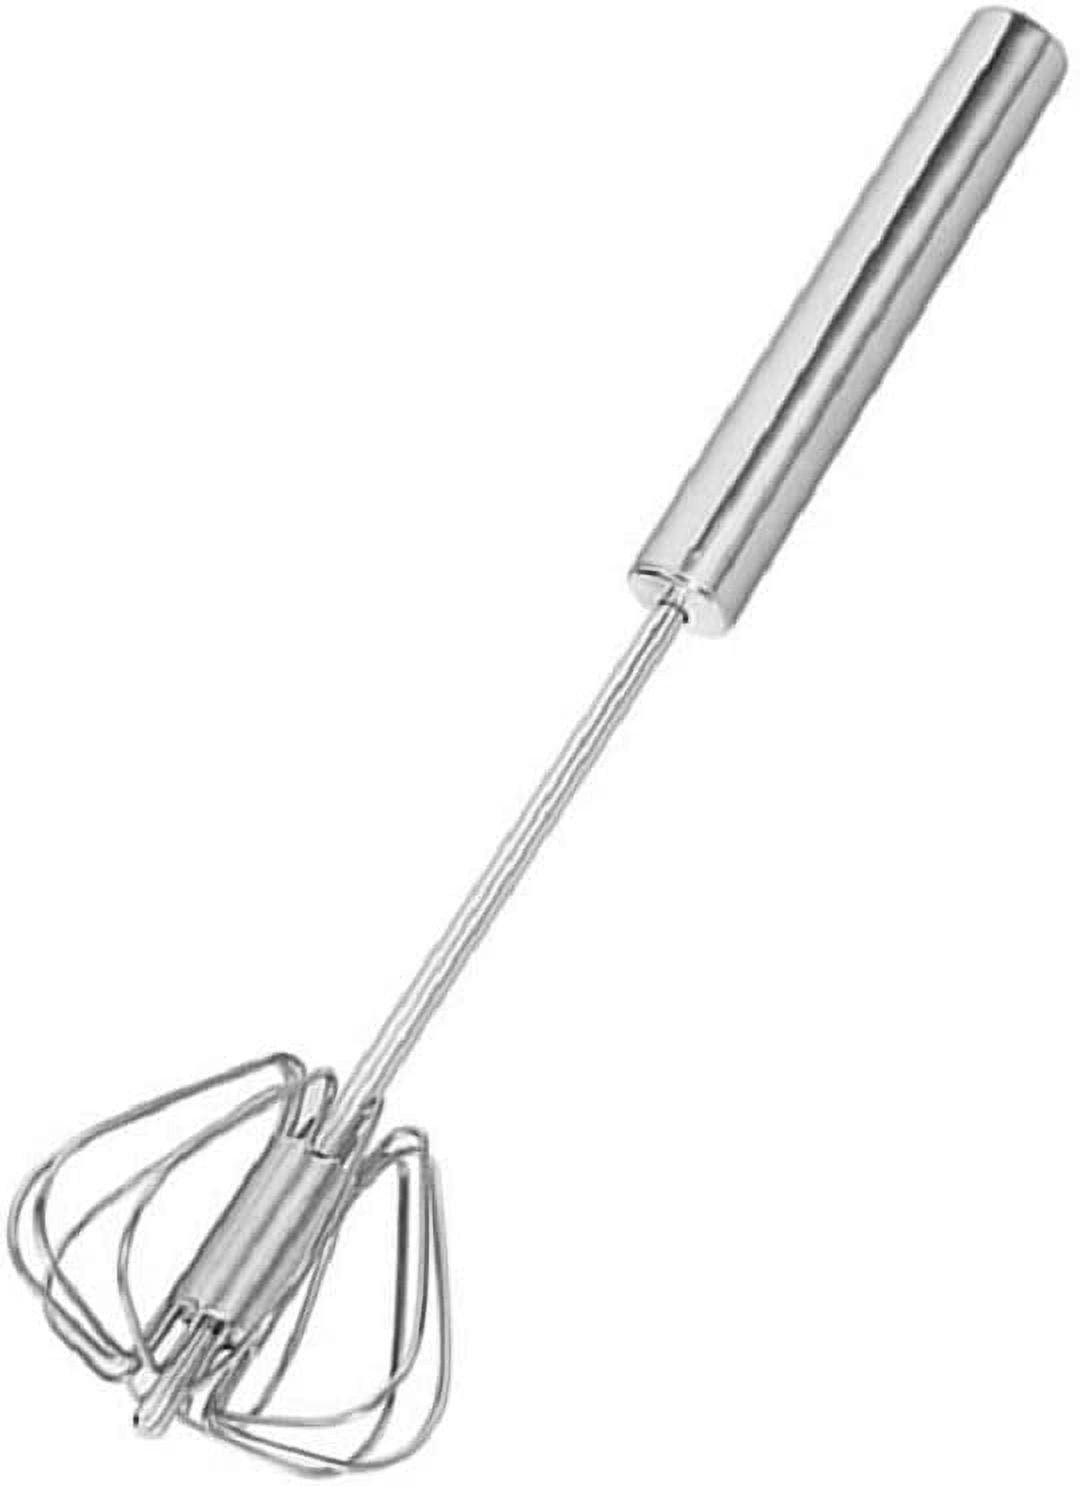 Mrs. Anderson's Baking Double Balloon with Aerator Ball Wire Whisk,  Stainless Steel, 12-Inch